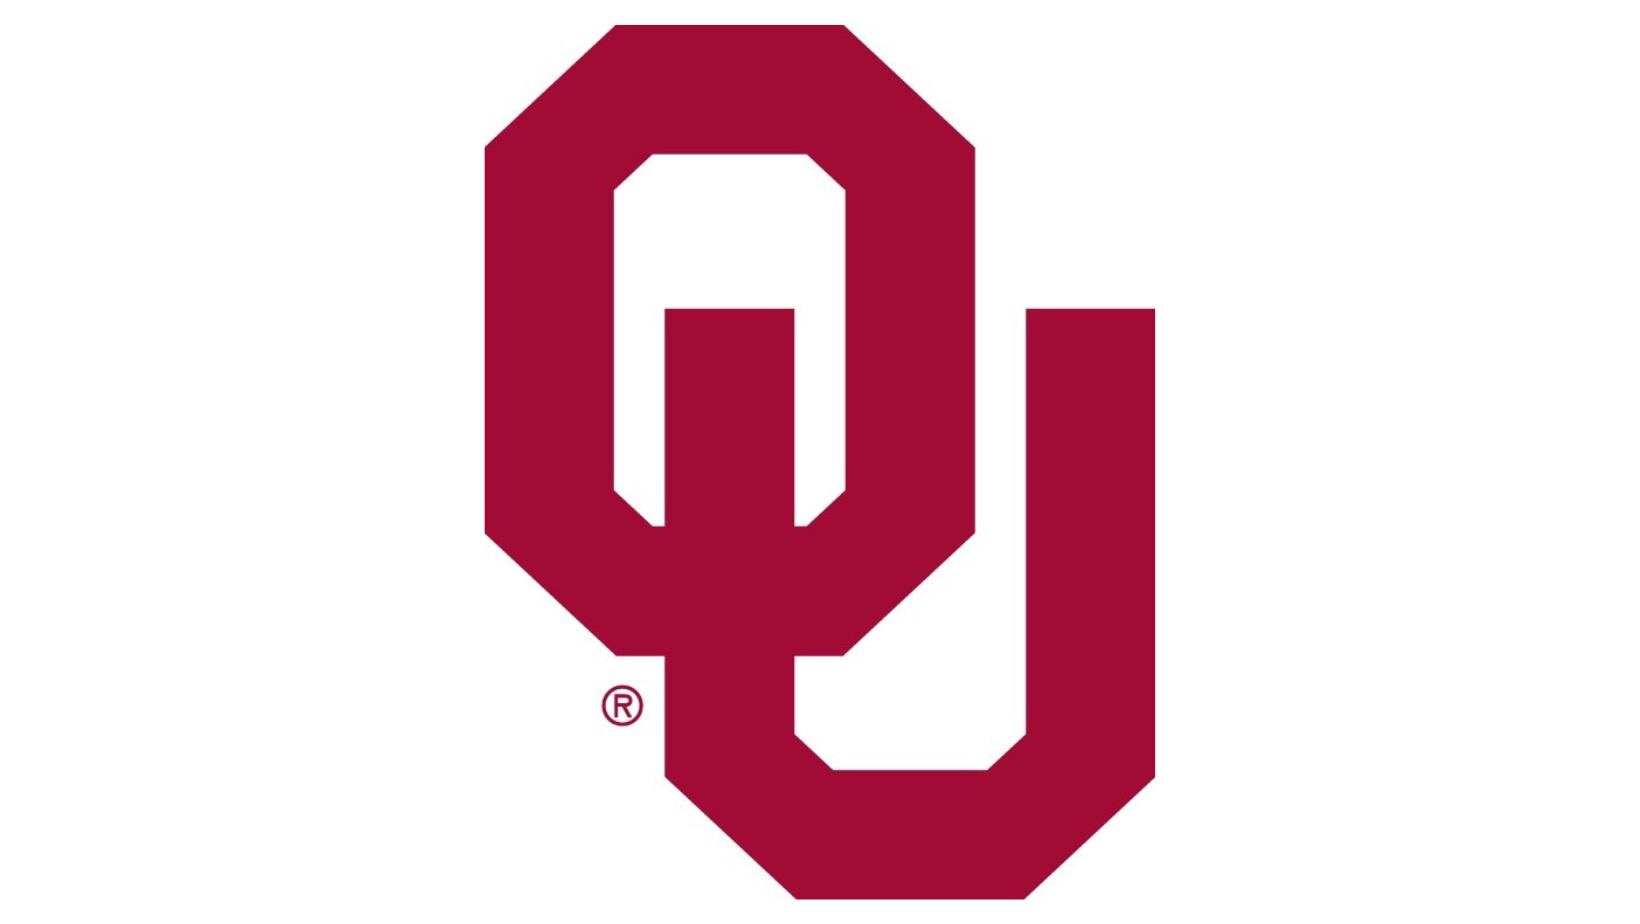 Gaylord College of Journalism and Mass Communication, The University of Oklahoma